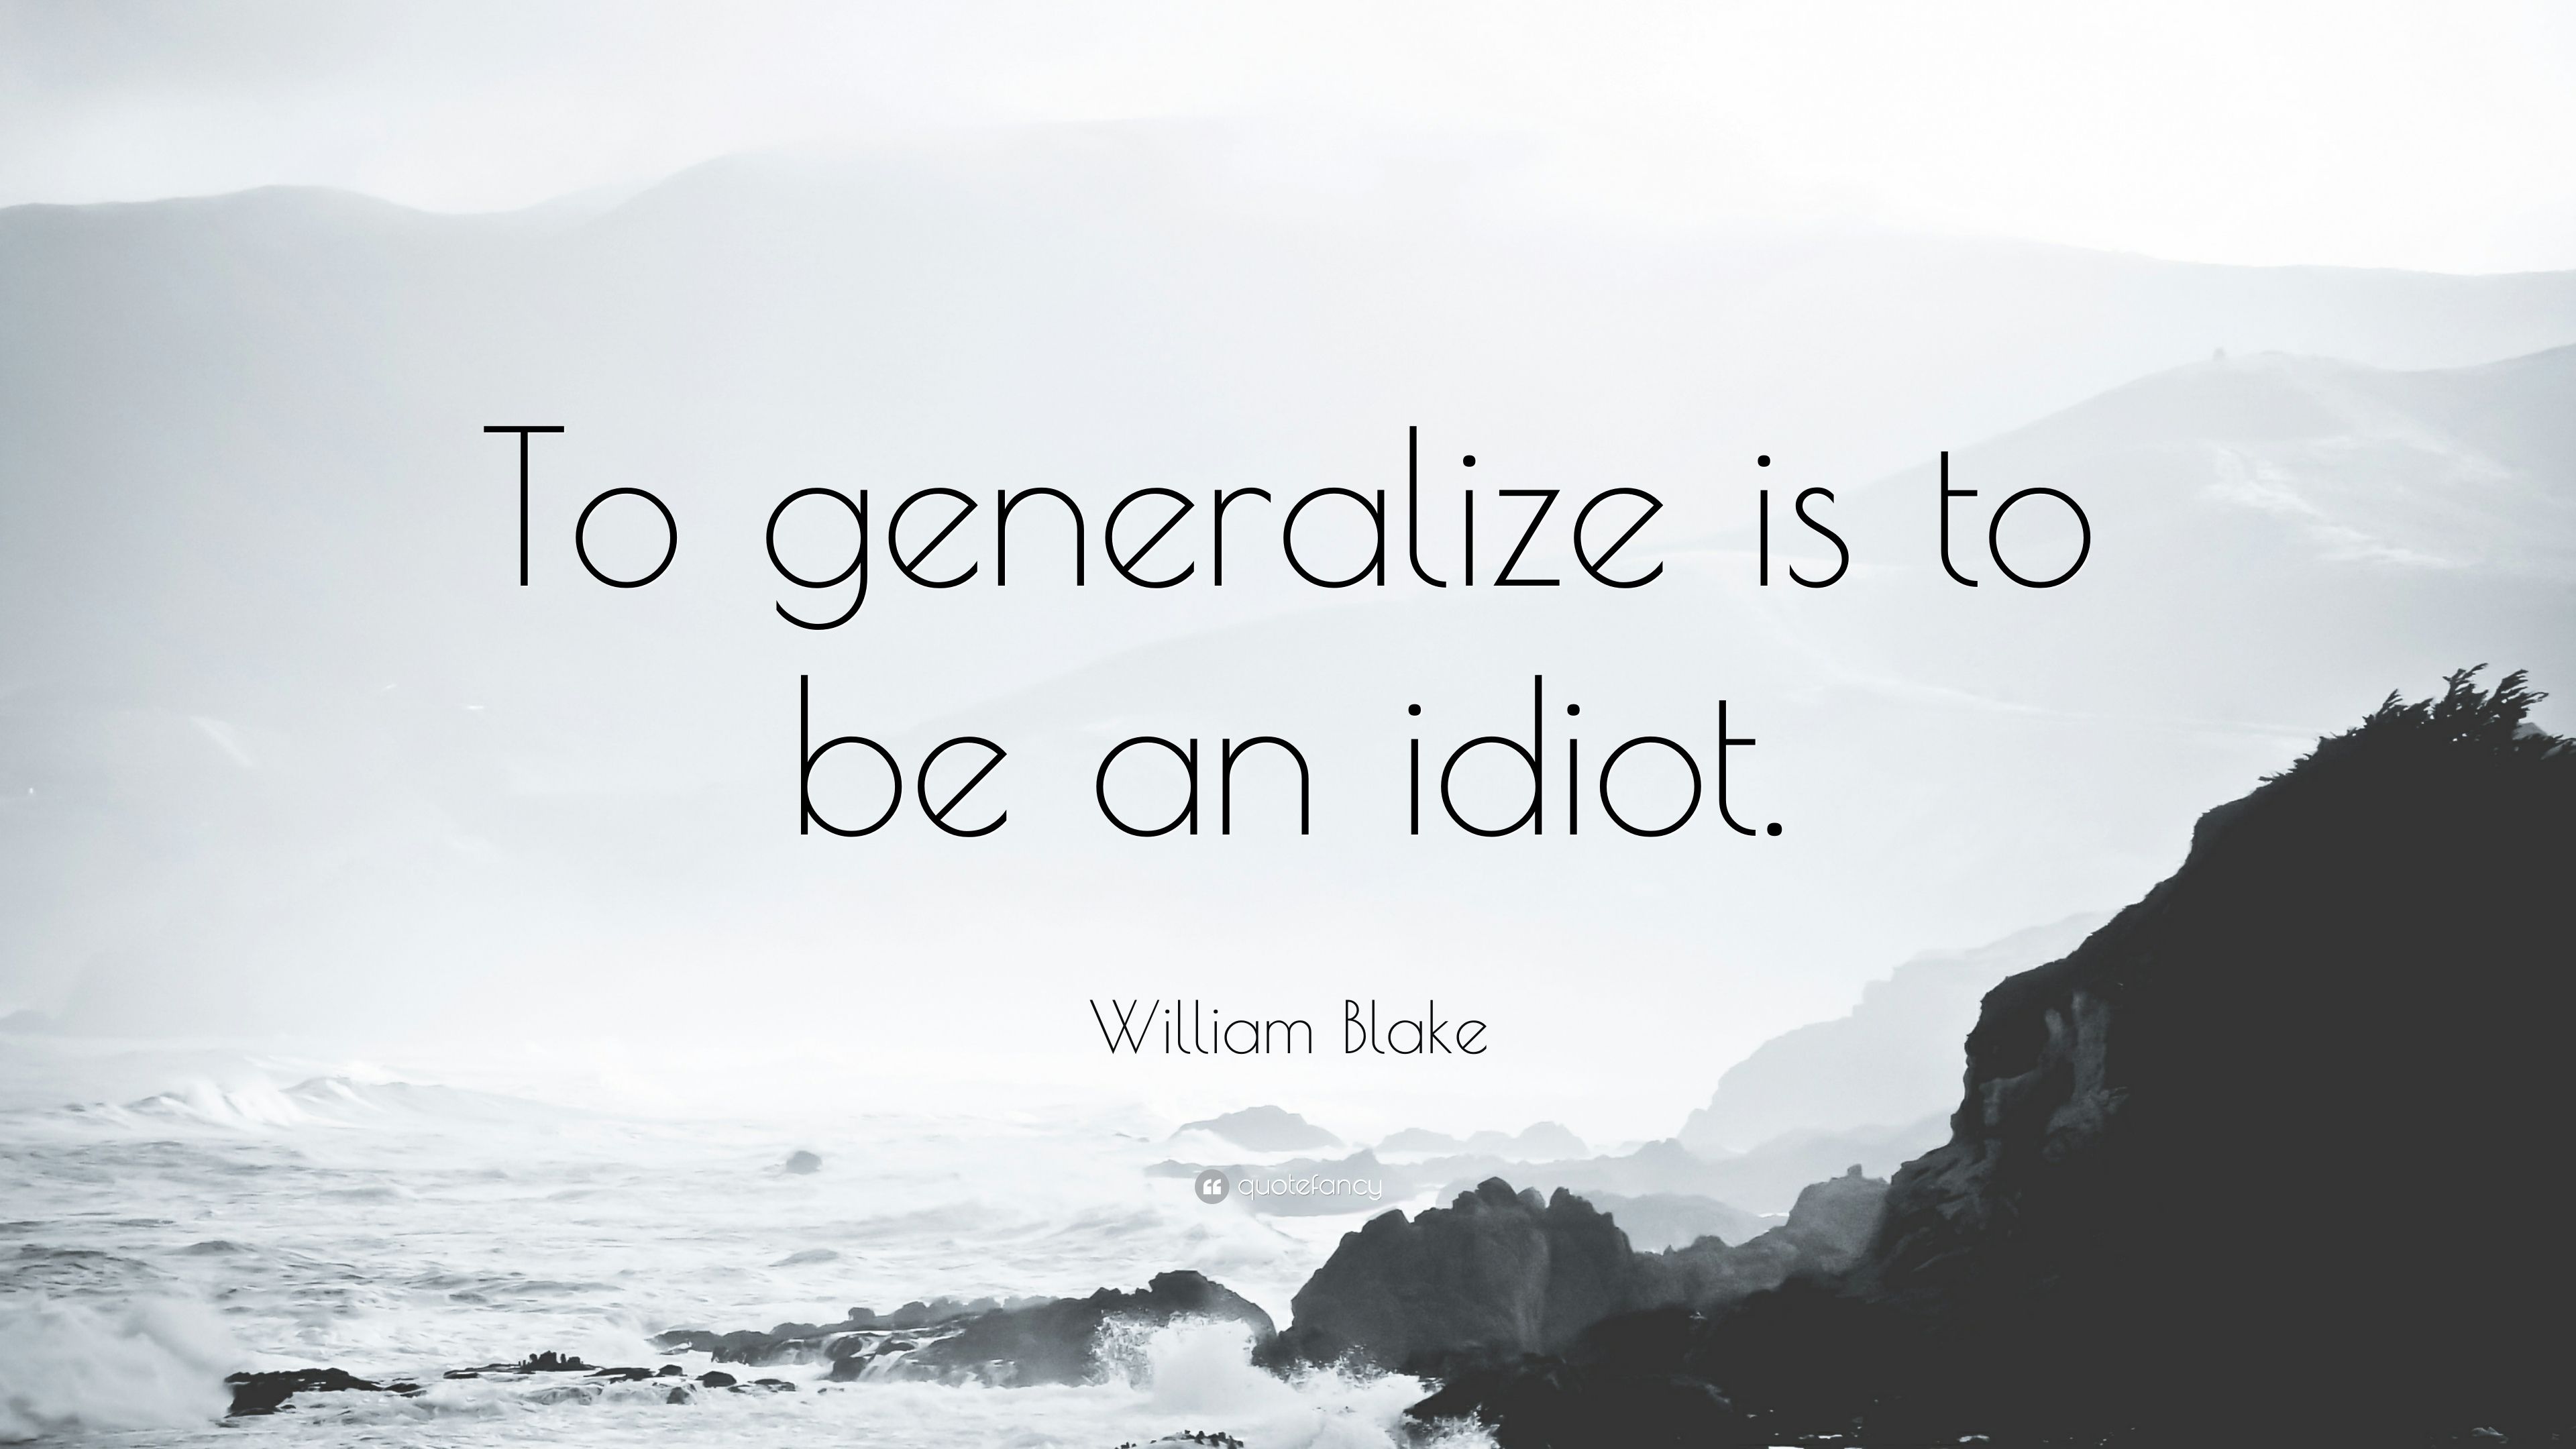 William Blake Quote: “To generalize is to be an idiot.” 12